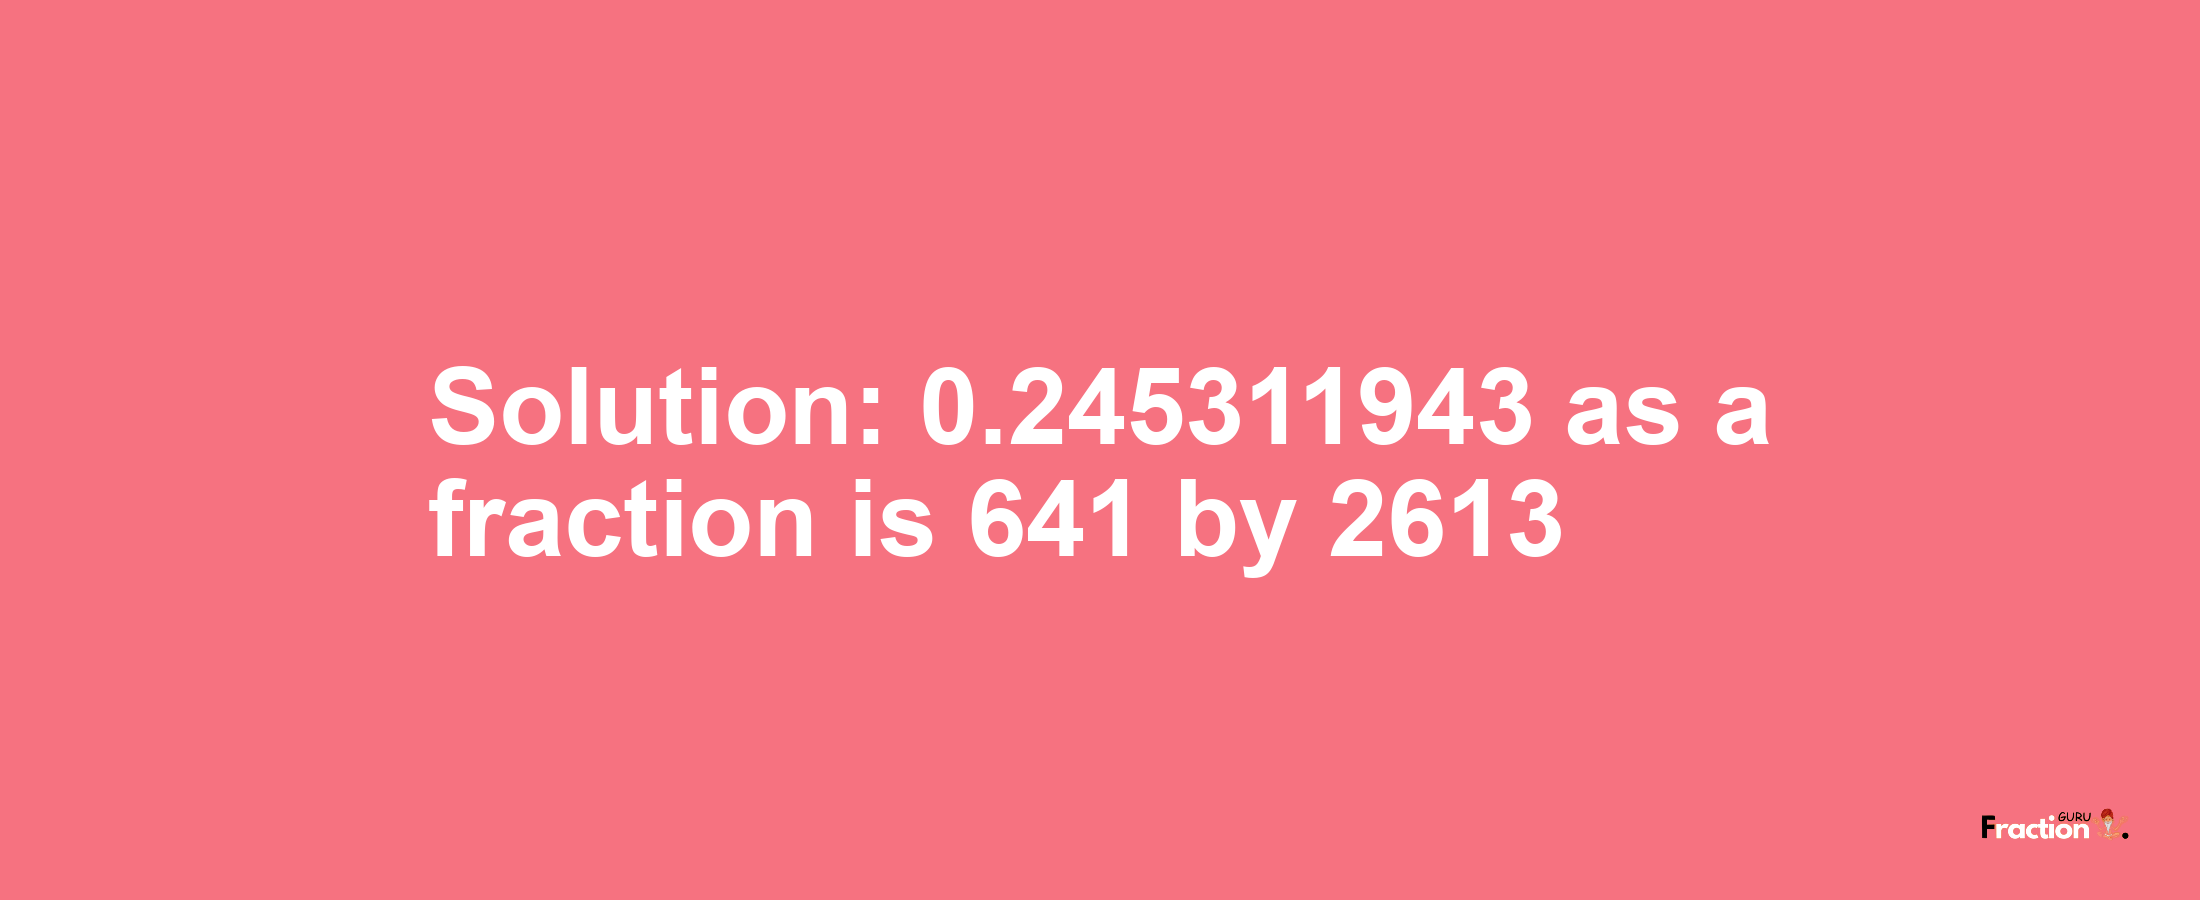 Solution:0.245311943 as a fraction is 641/2613